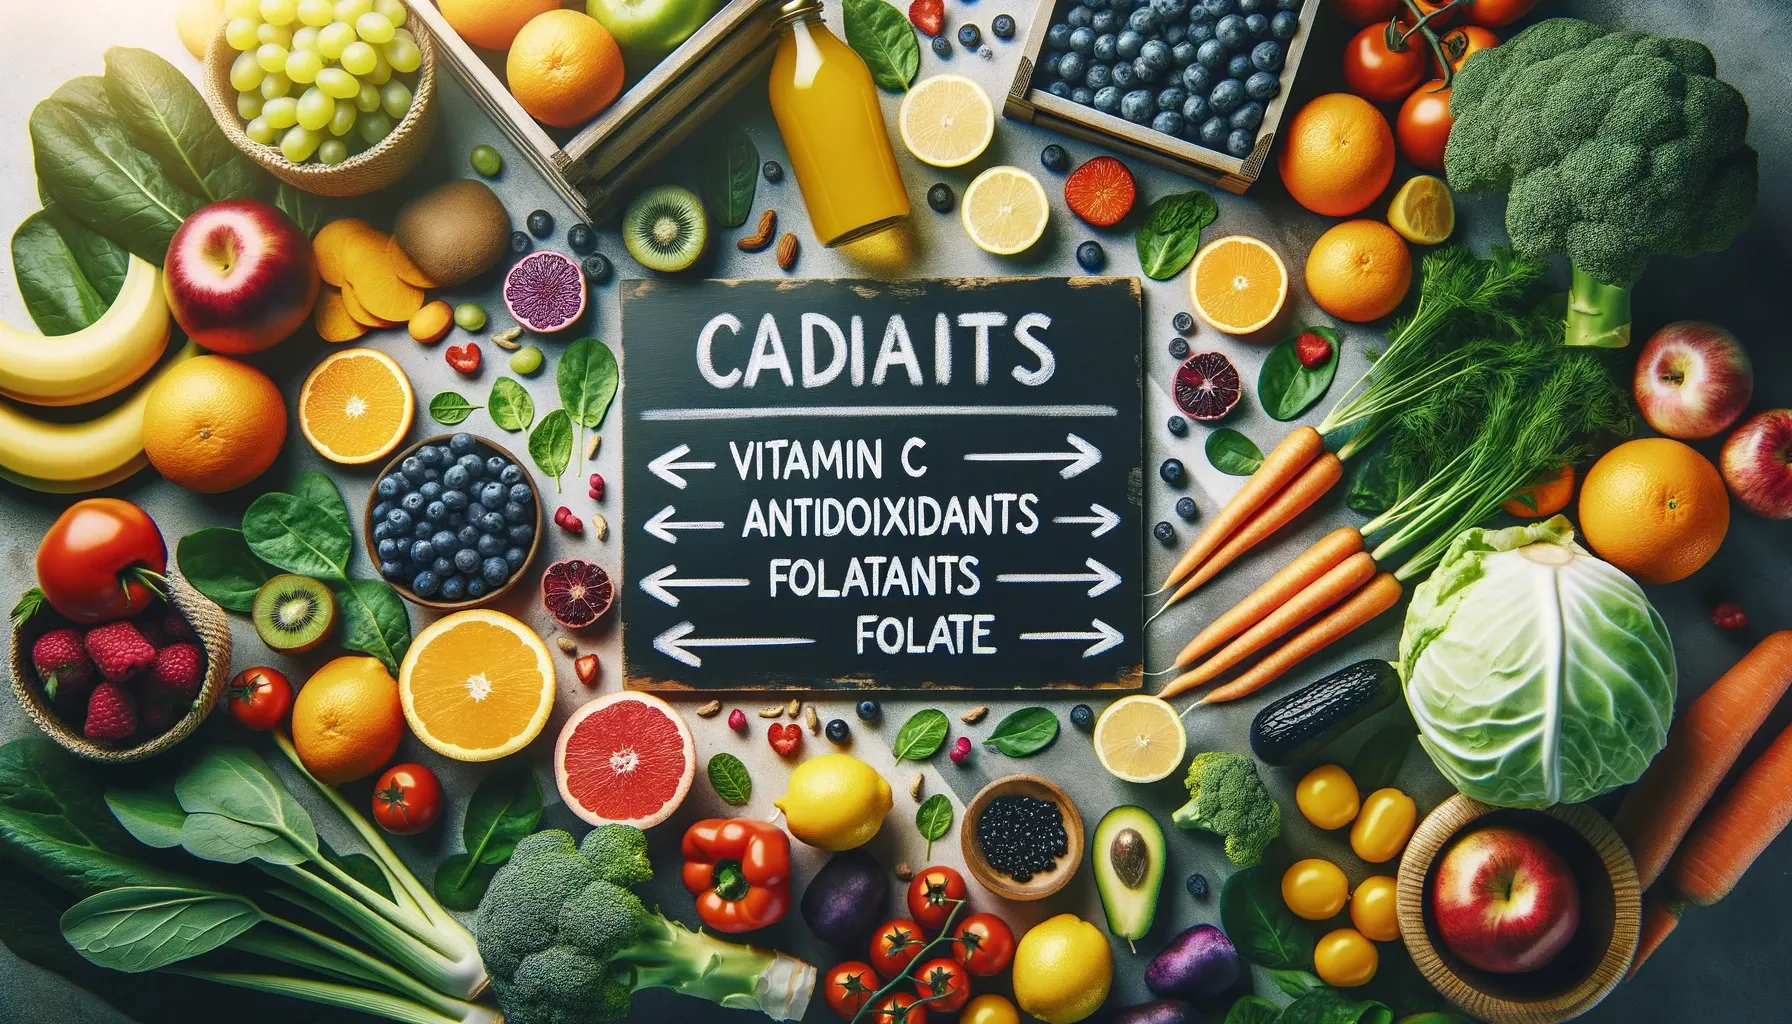 Table spread of colorful foods with nutrient labels.